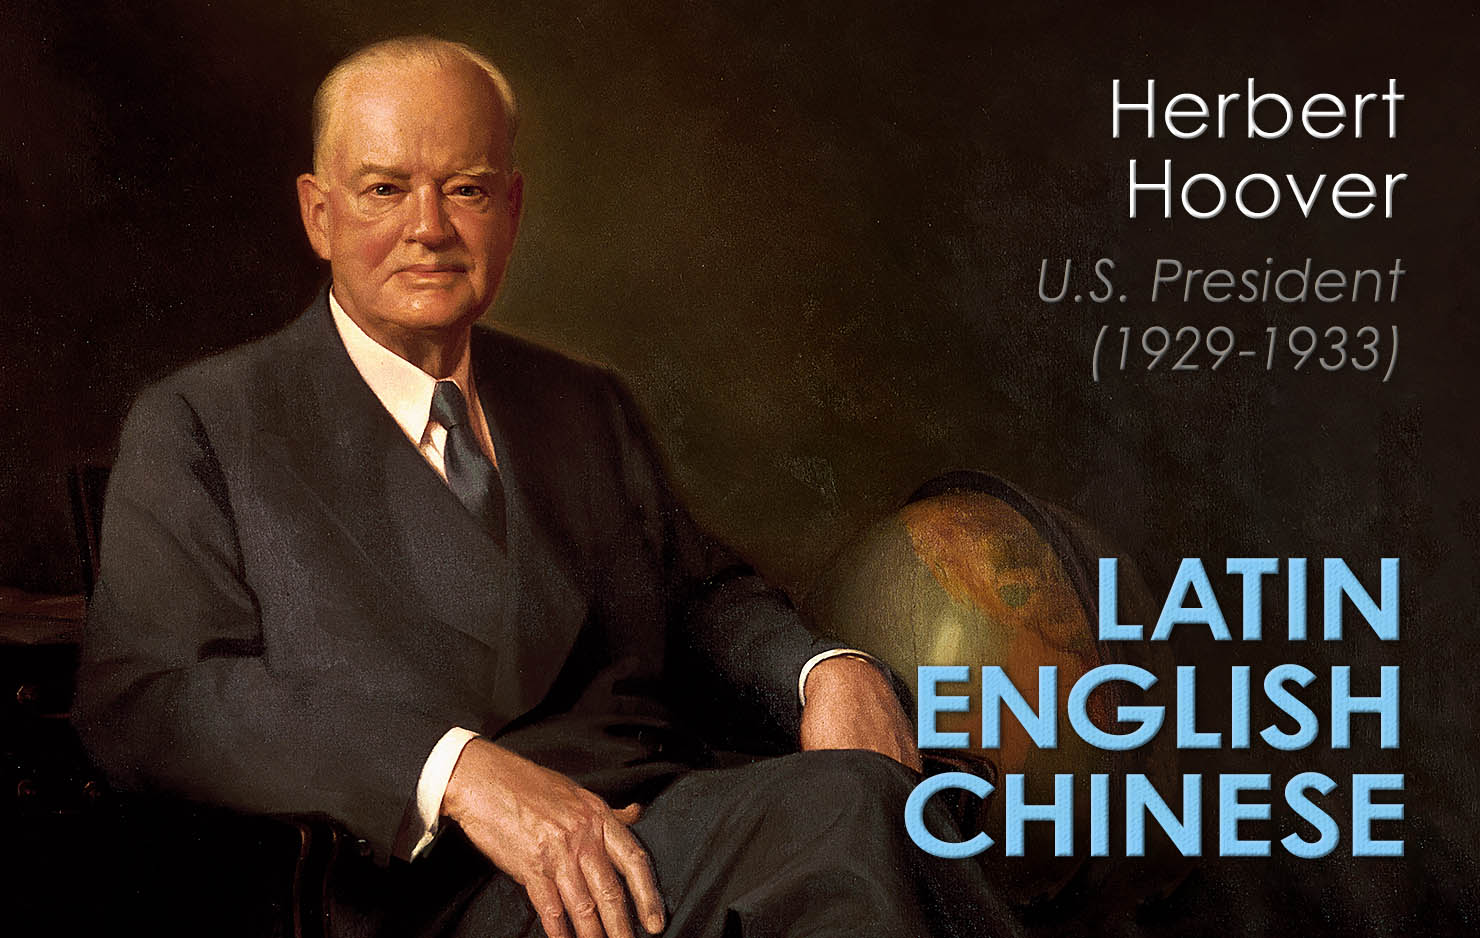 President Herbert Hoover learned Chinese while he was working in China. Hoover’s wife, Lou Henry Hoover, is the only First Lady of the United States to have spoken an Asian language. Her background is varied and inspiring.